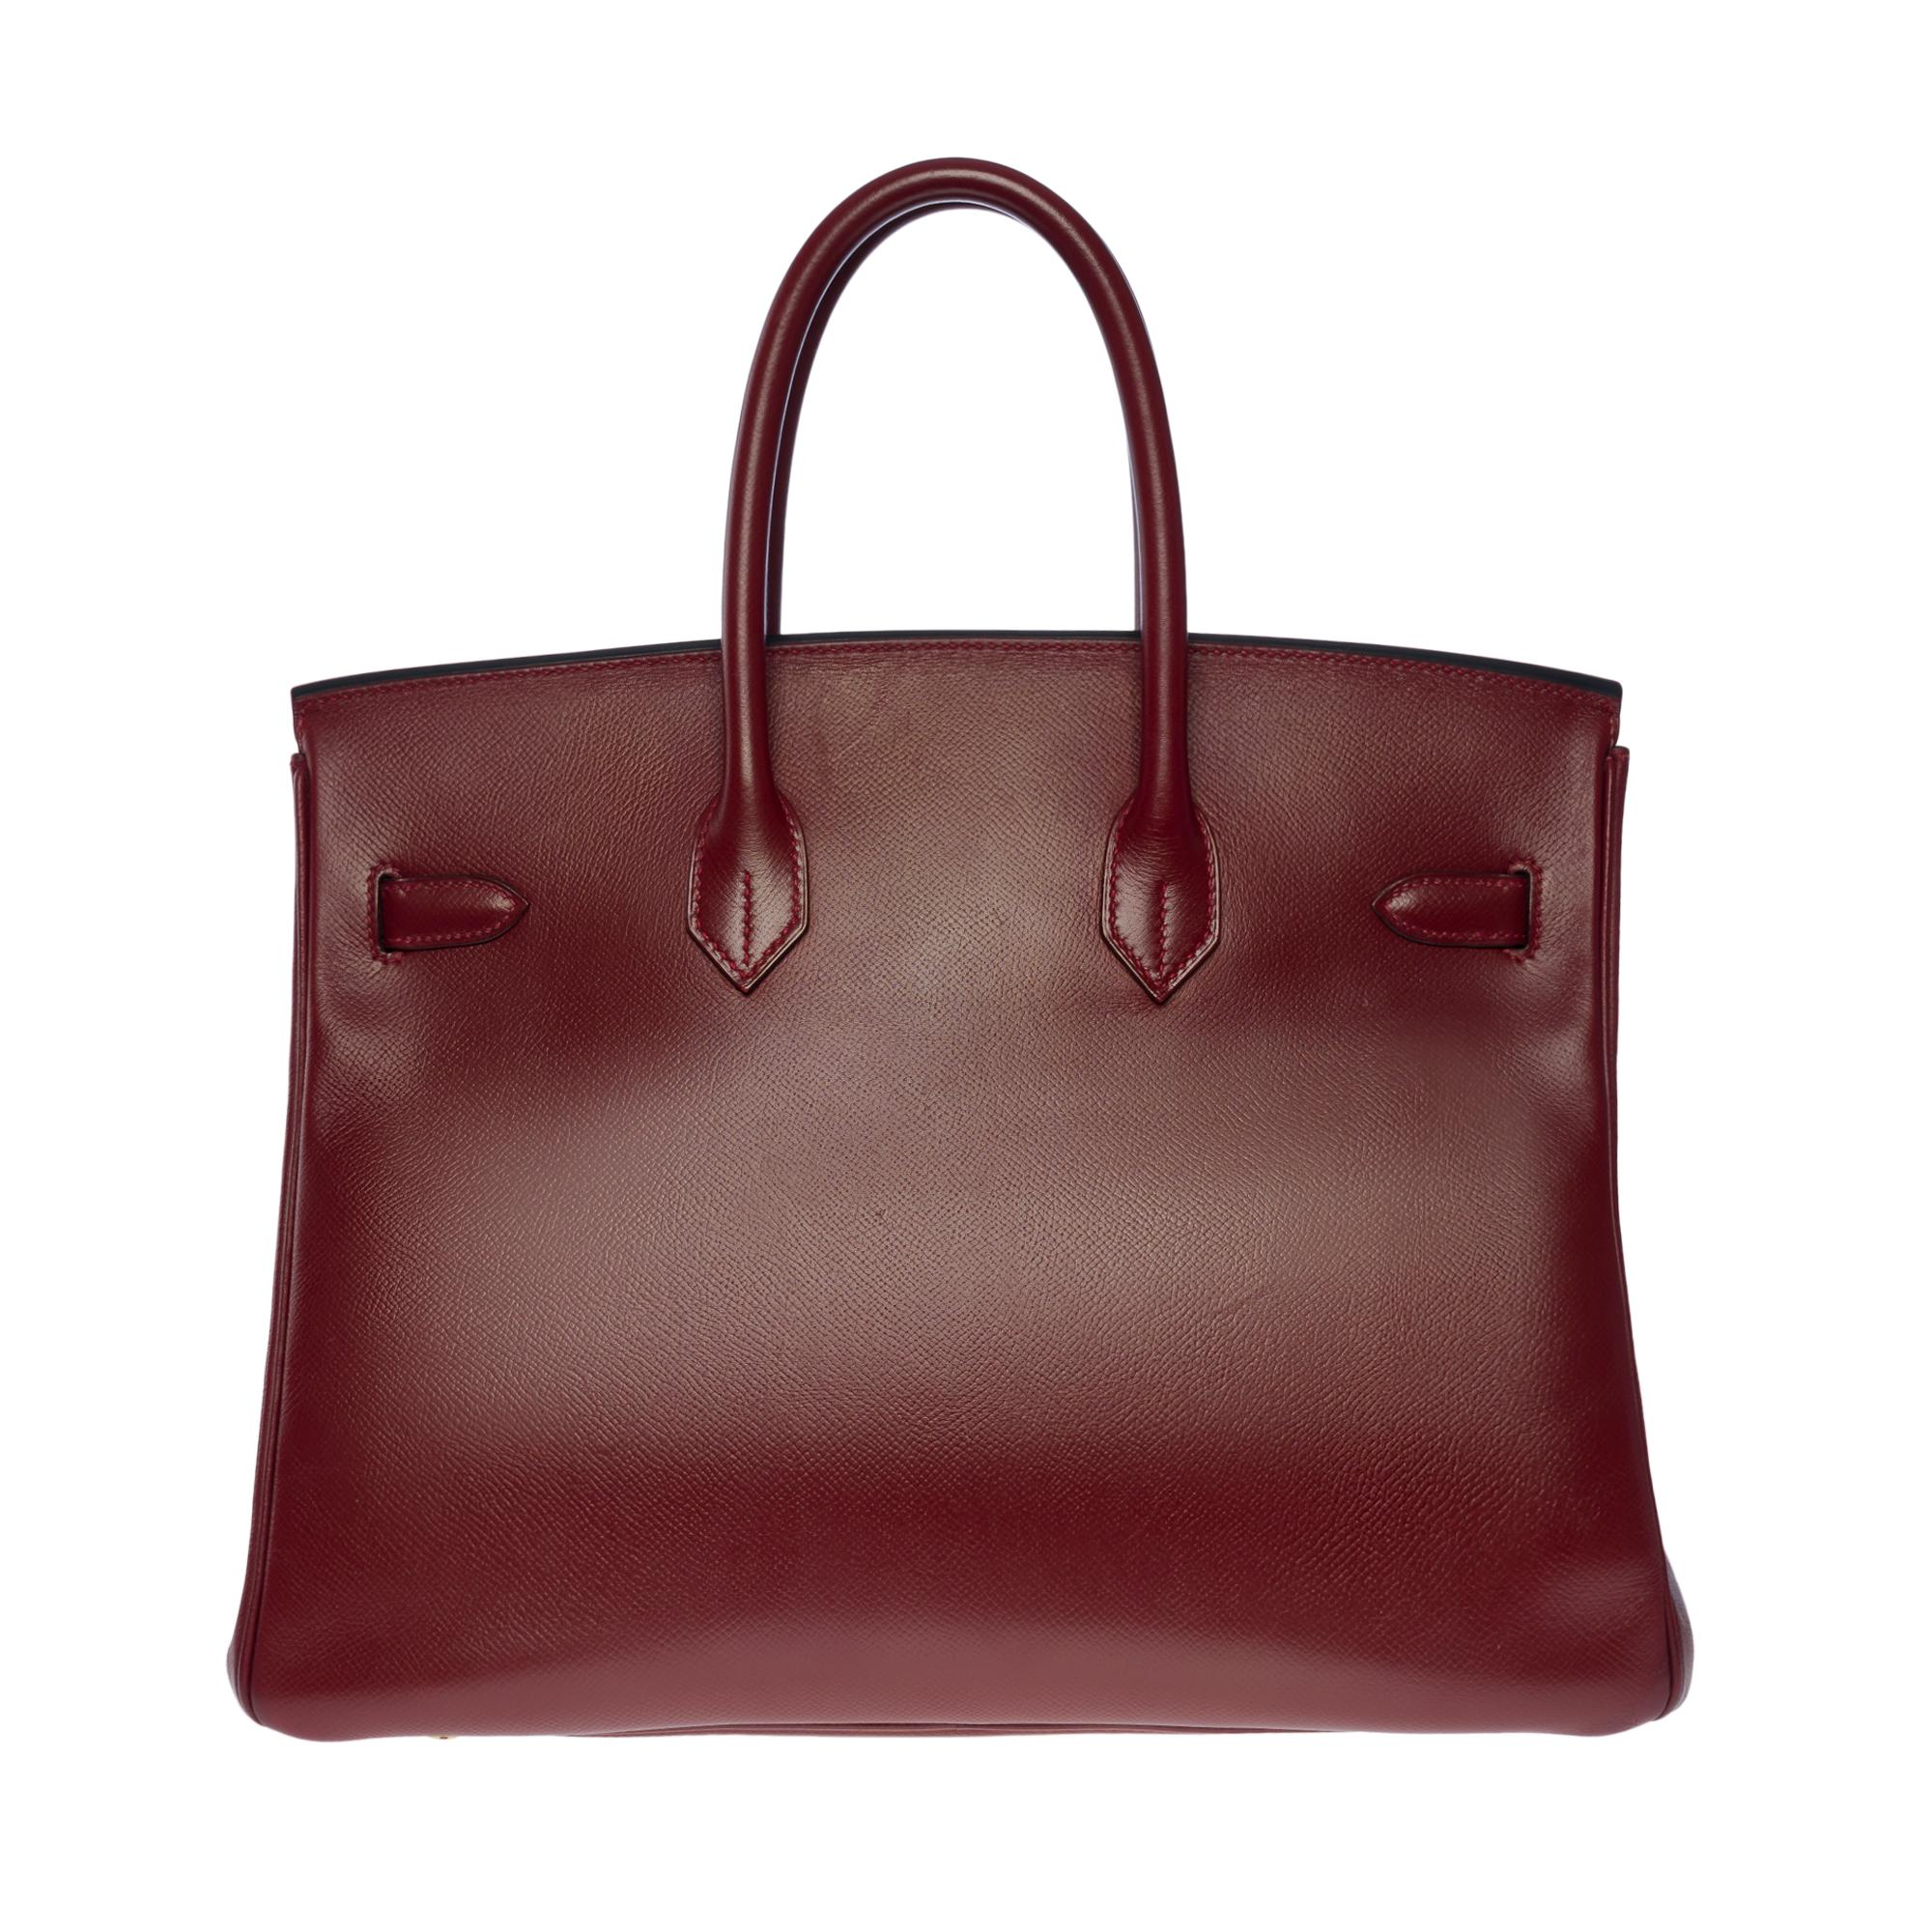 Amazing Hermes Birkin 35 handbag in Red H epsom leather (Burgundy), gold plated metal hardware, double handle in burgundy leather allowing a hand-carried

Flap closure
Burgundy leather lining, one zippered pocket, one patch pocket
Signature: 